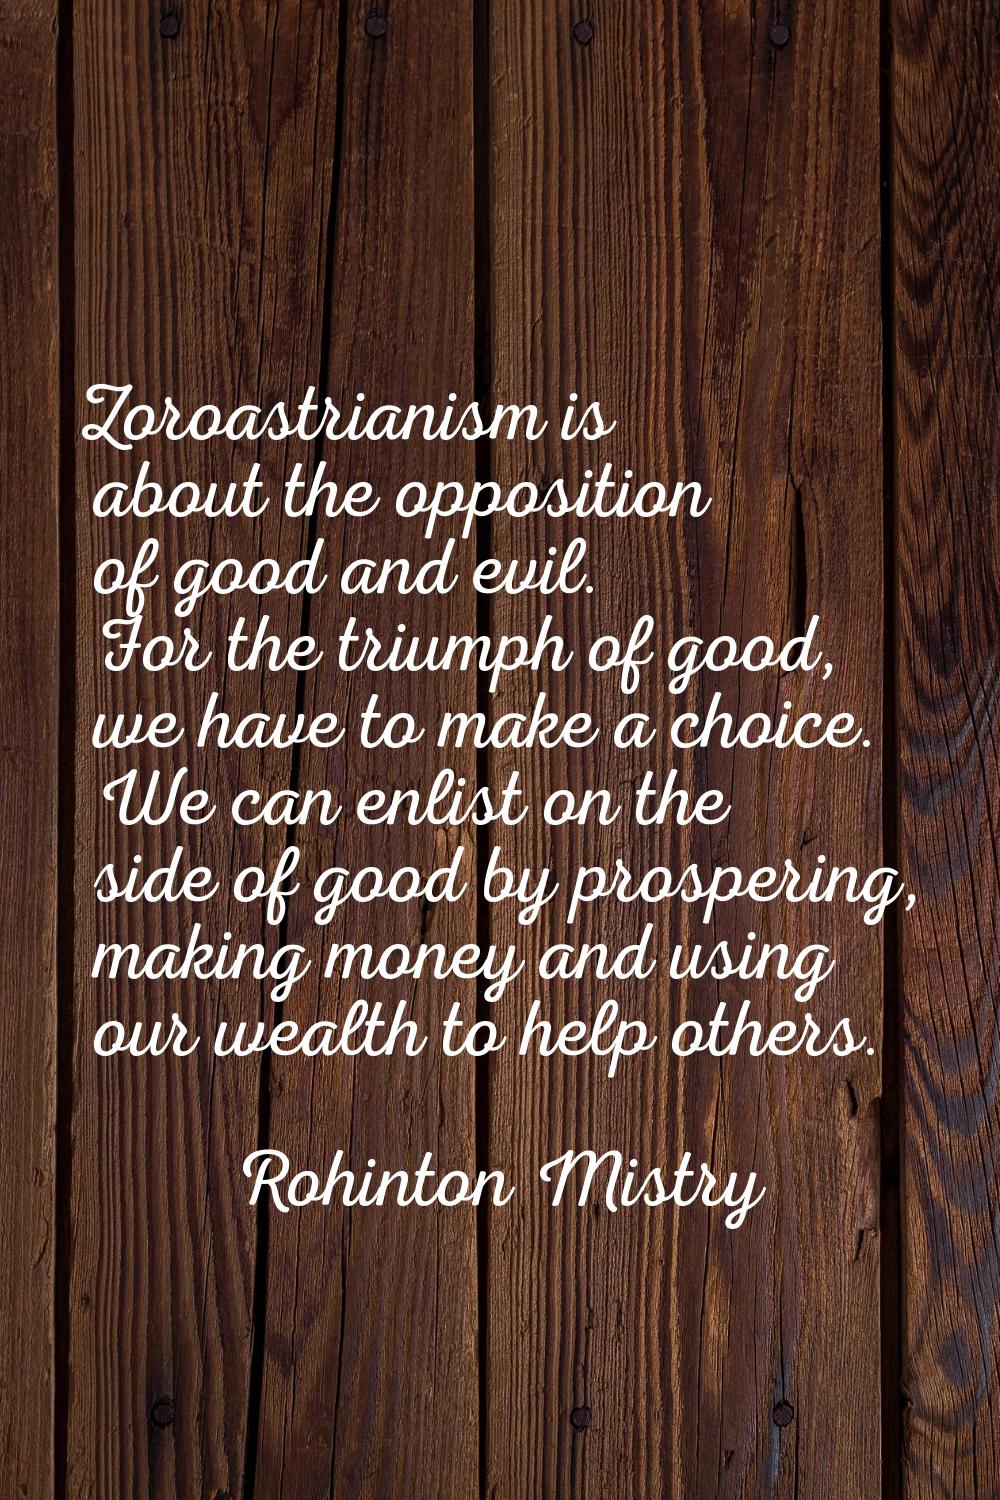 Zoroastrianism is about the opposition of good and evil. For the triumph of good, we have to make a